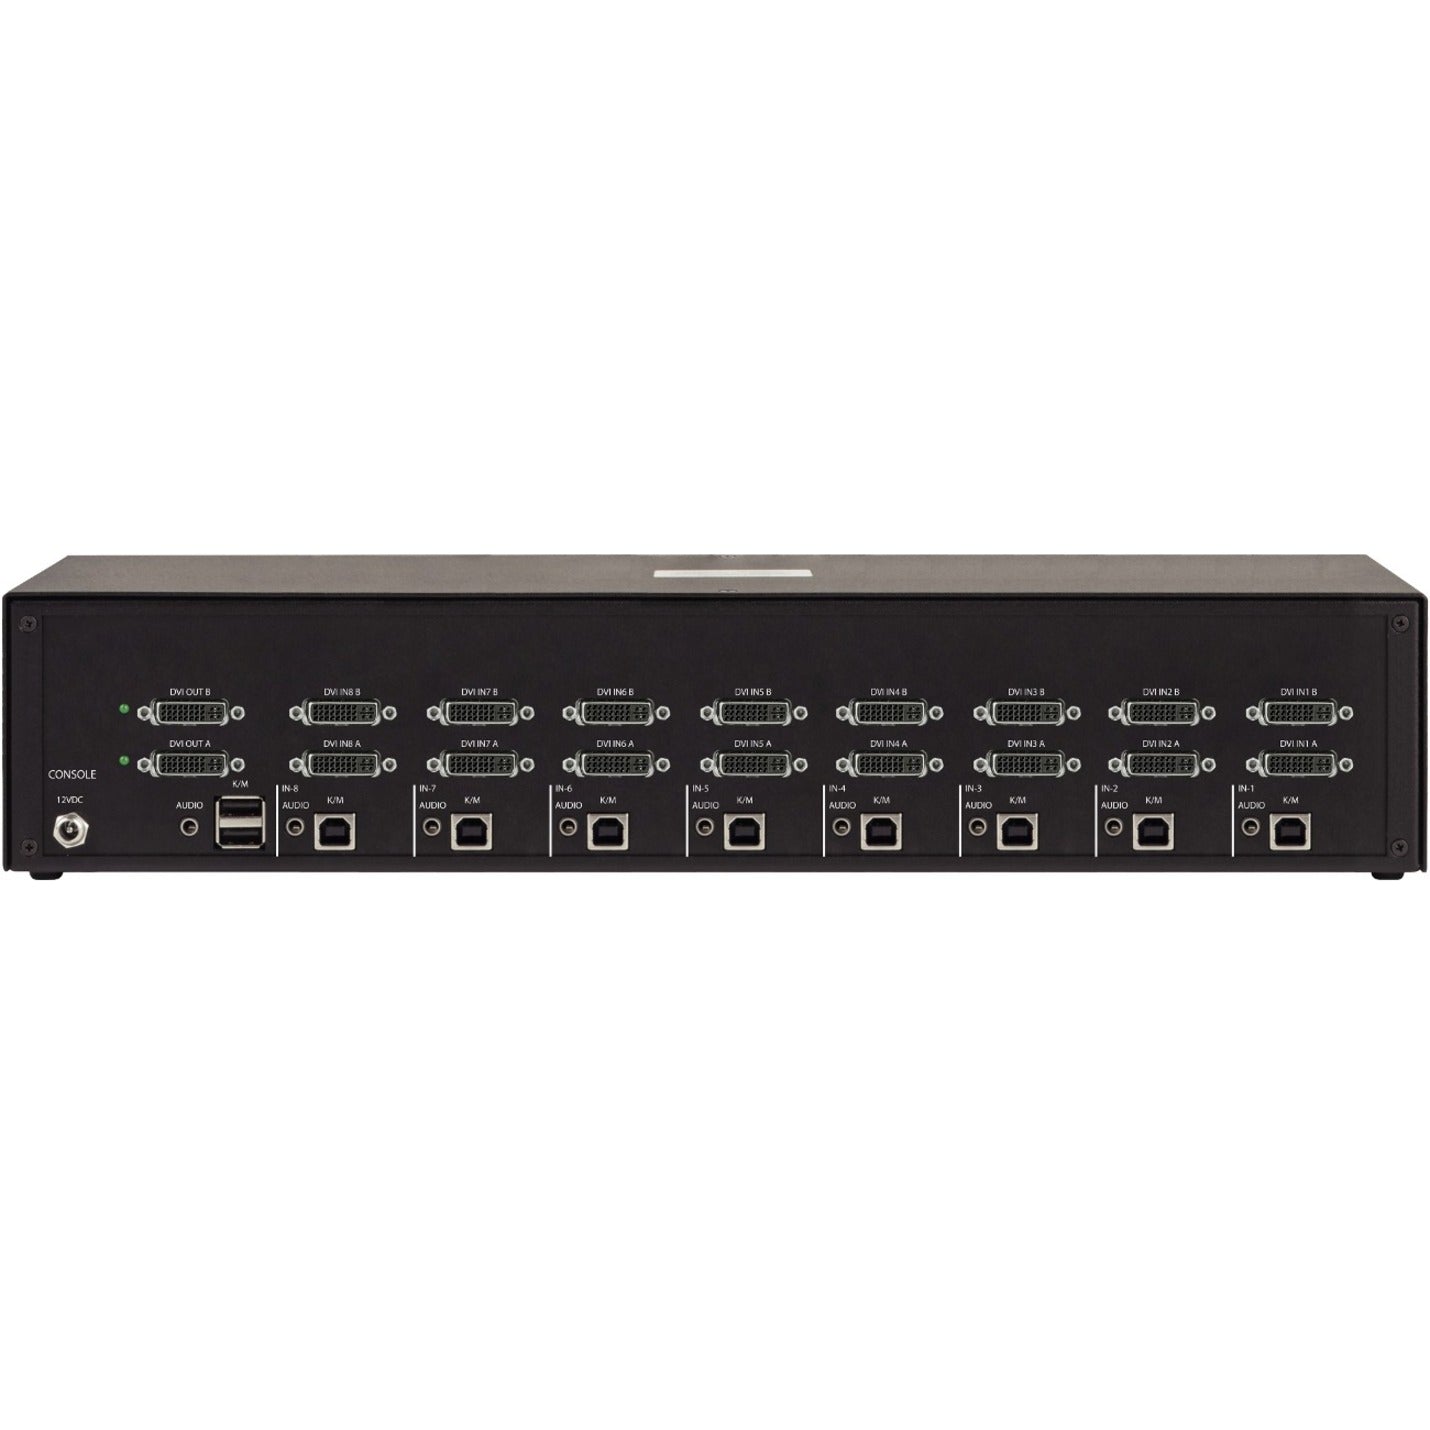 Black Box KVS4-2008D Secure KVM Switch - DVI-I, 16 Computers Supported, 1 Year Warranty